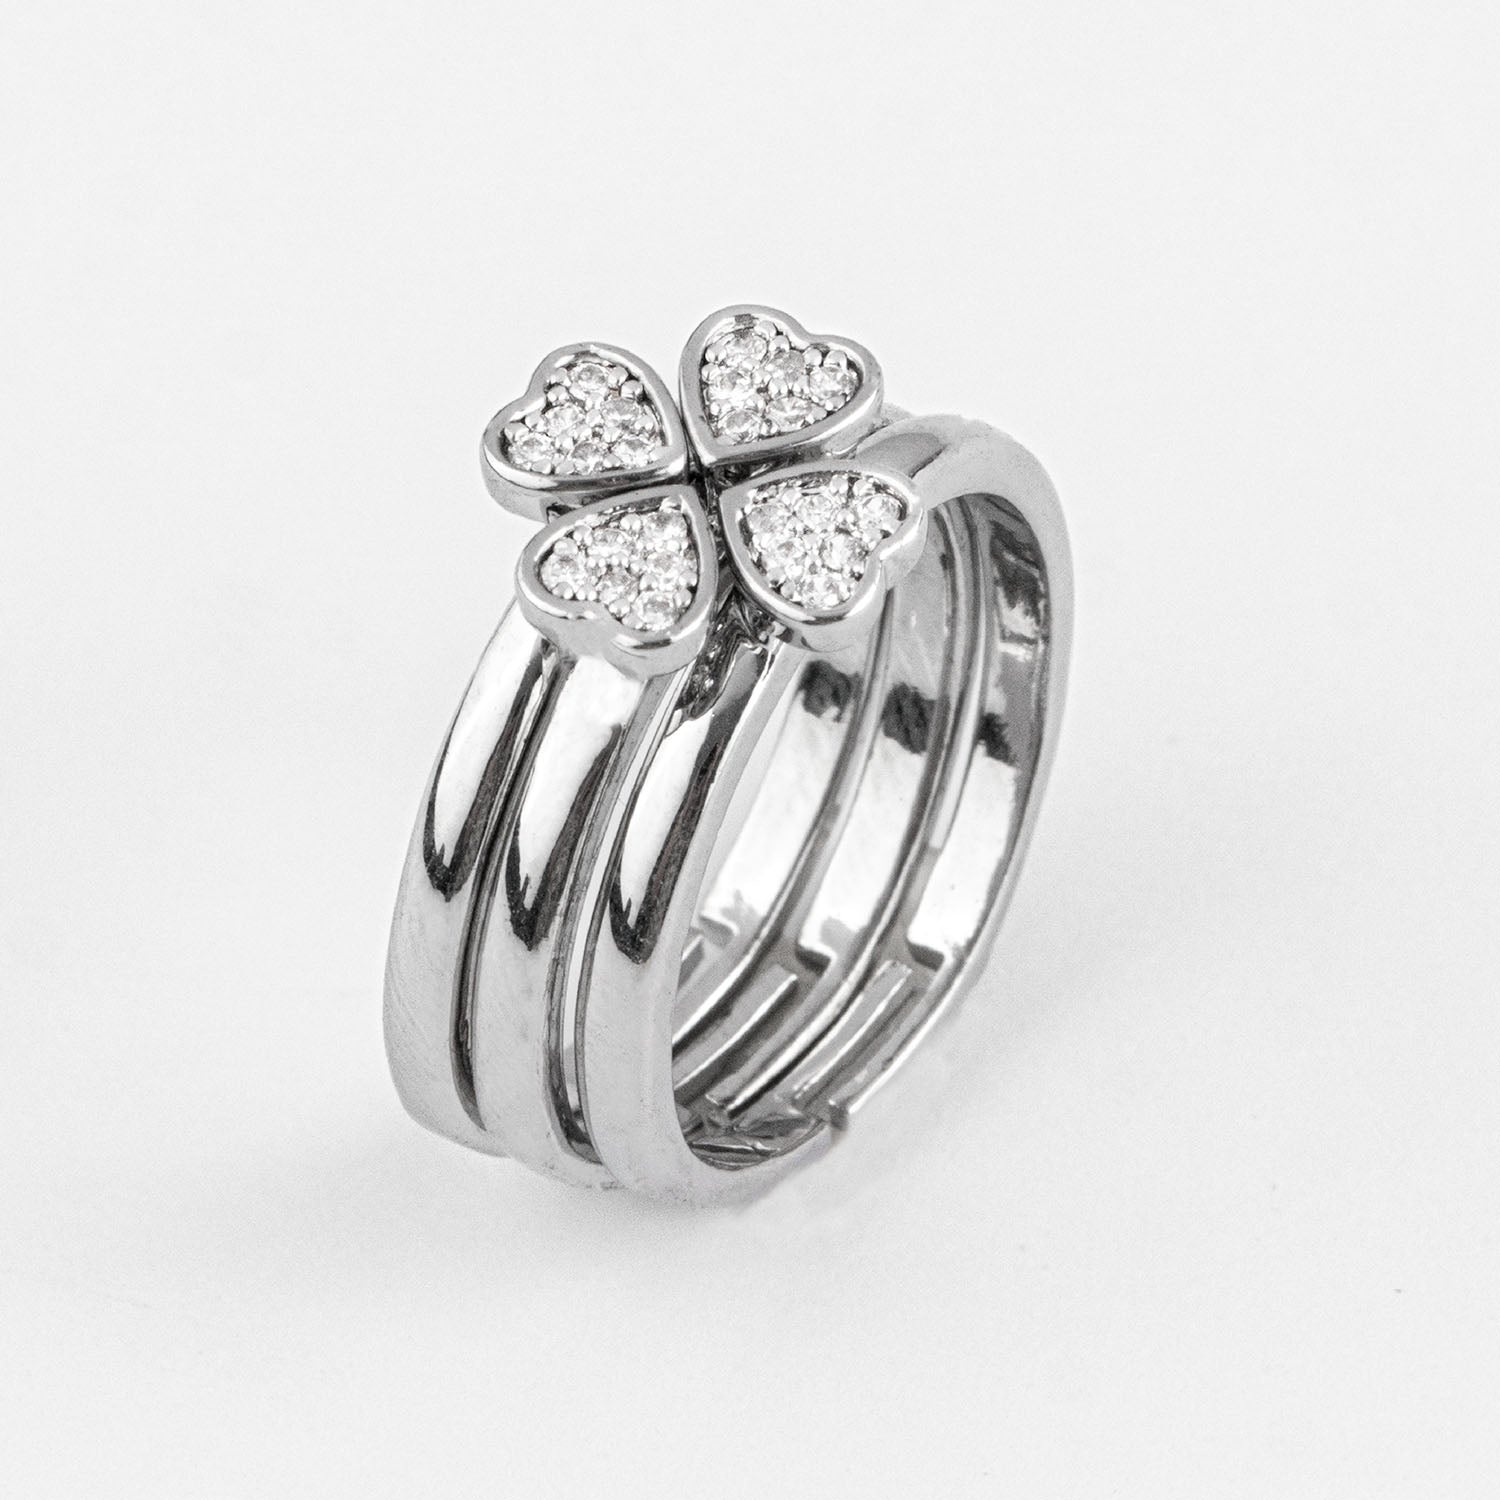 W Premium Jewellery Silver Clover Heart Rings (Pack Of 3)